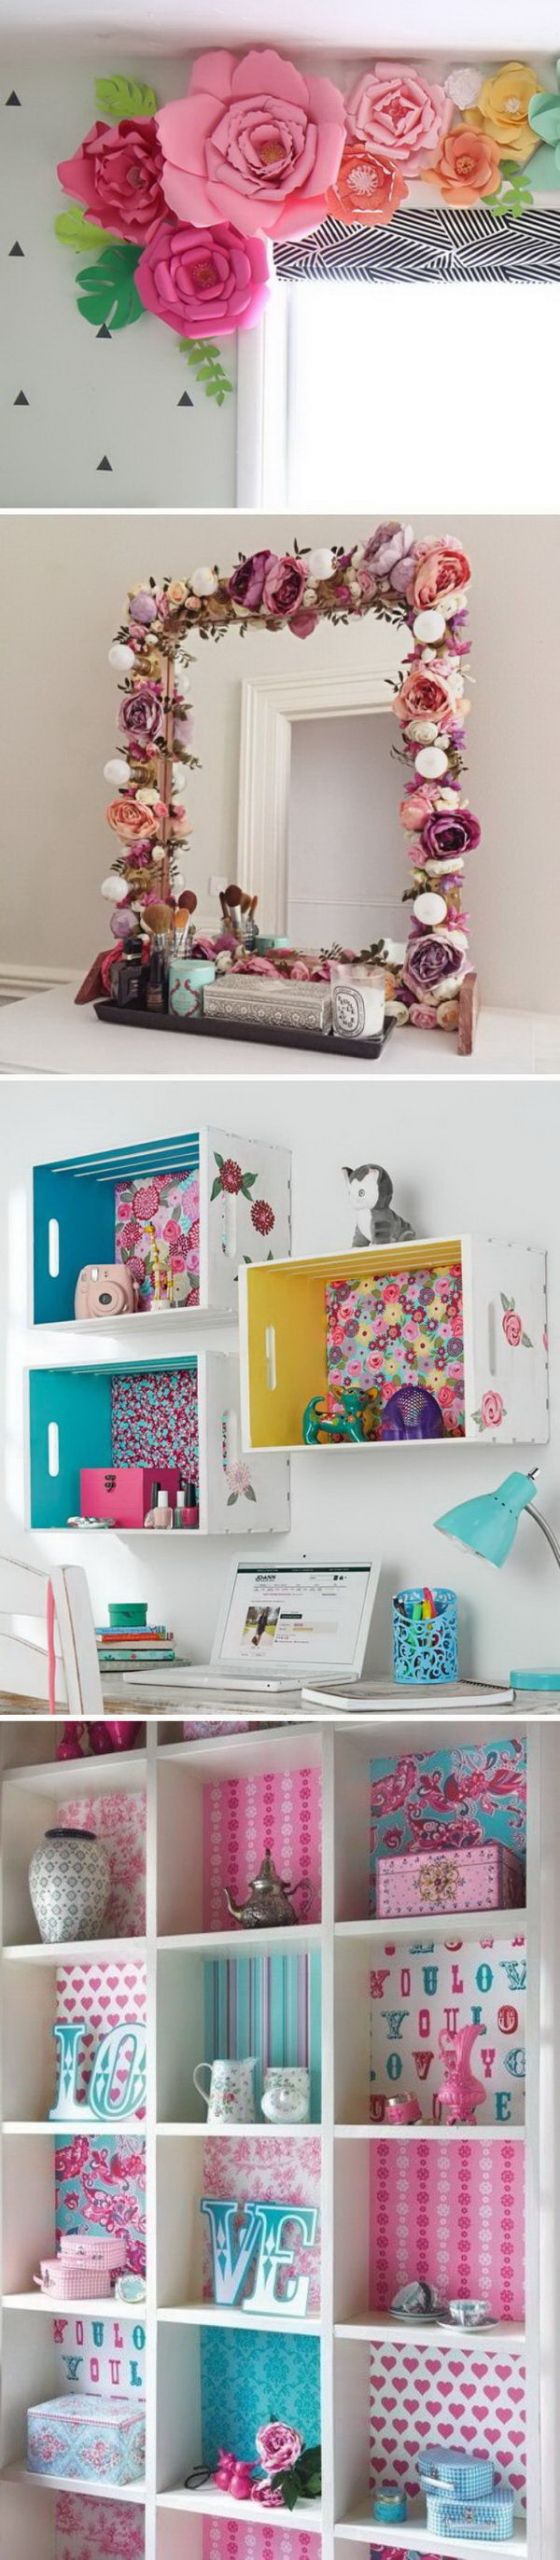 DIY Decor For Girls Room
 20 Awesome DIY Projects To Decorate A Girl s Bedroom Hative